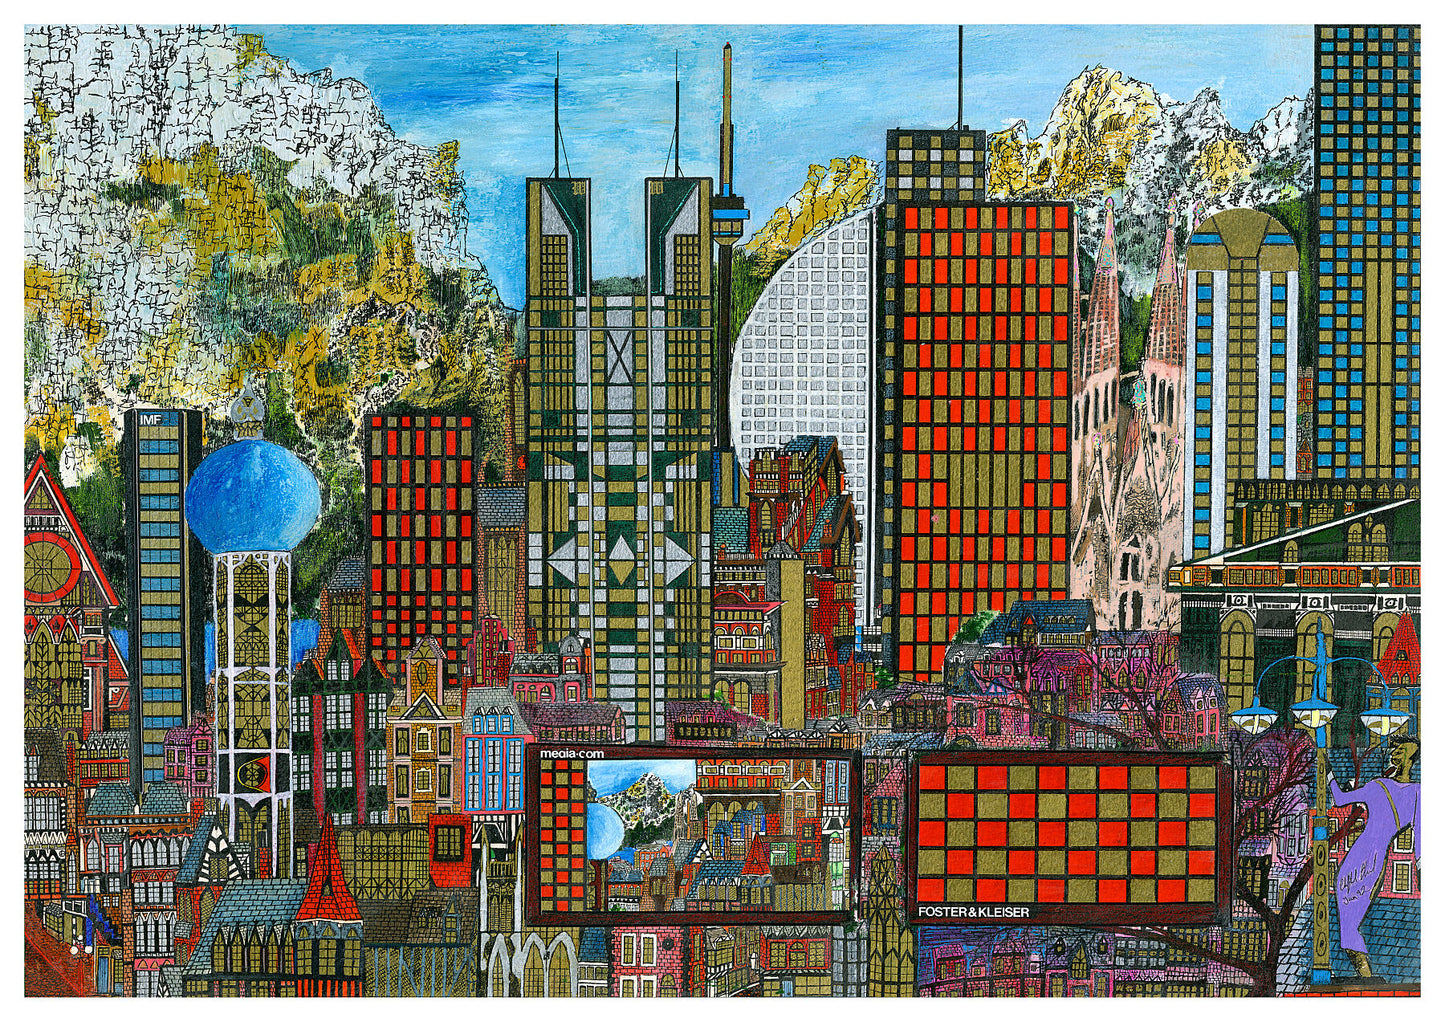 A late twentieth century global tour through architecture. What can you see? Barcelona? Tokyo? You decide